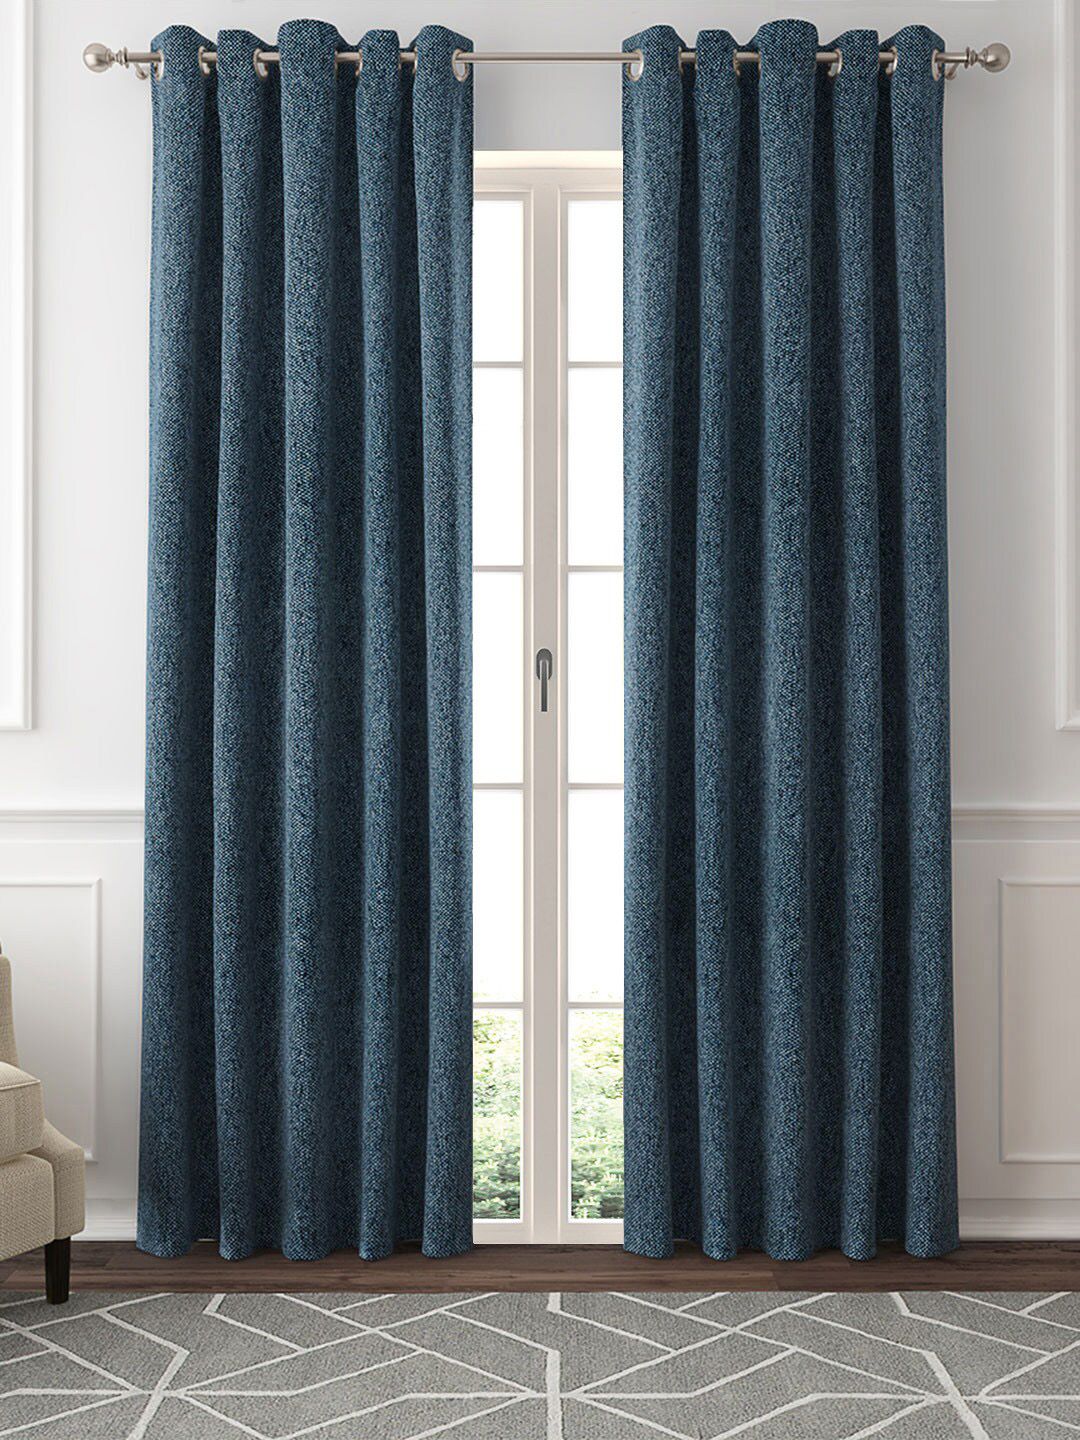 GM Blue Set of 2 Black Out Curtain Curtains Price in India